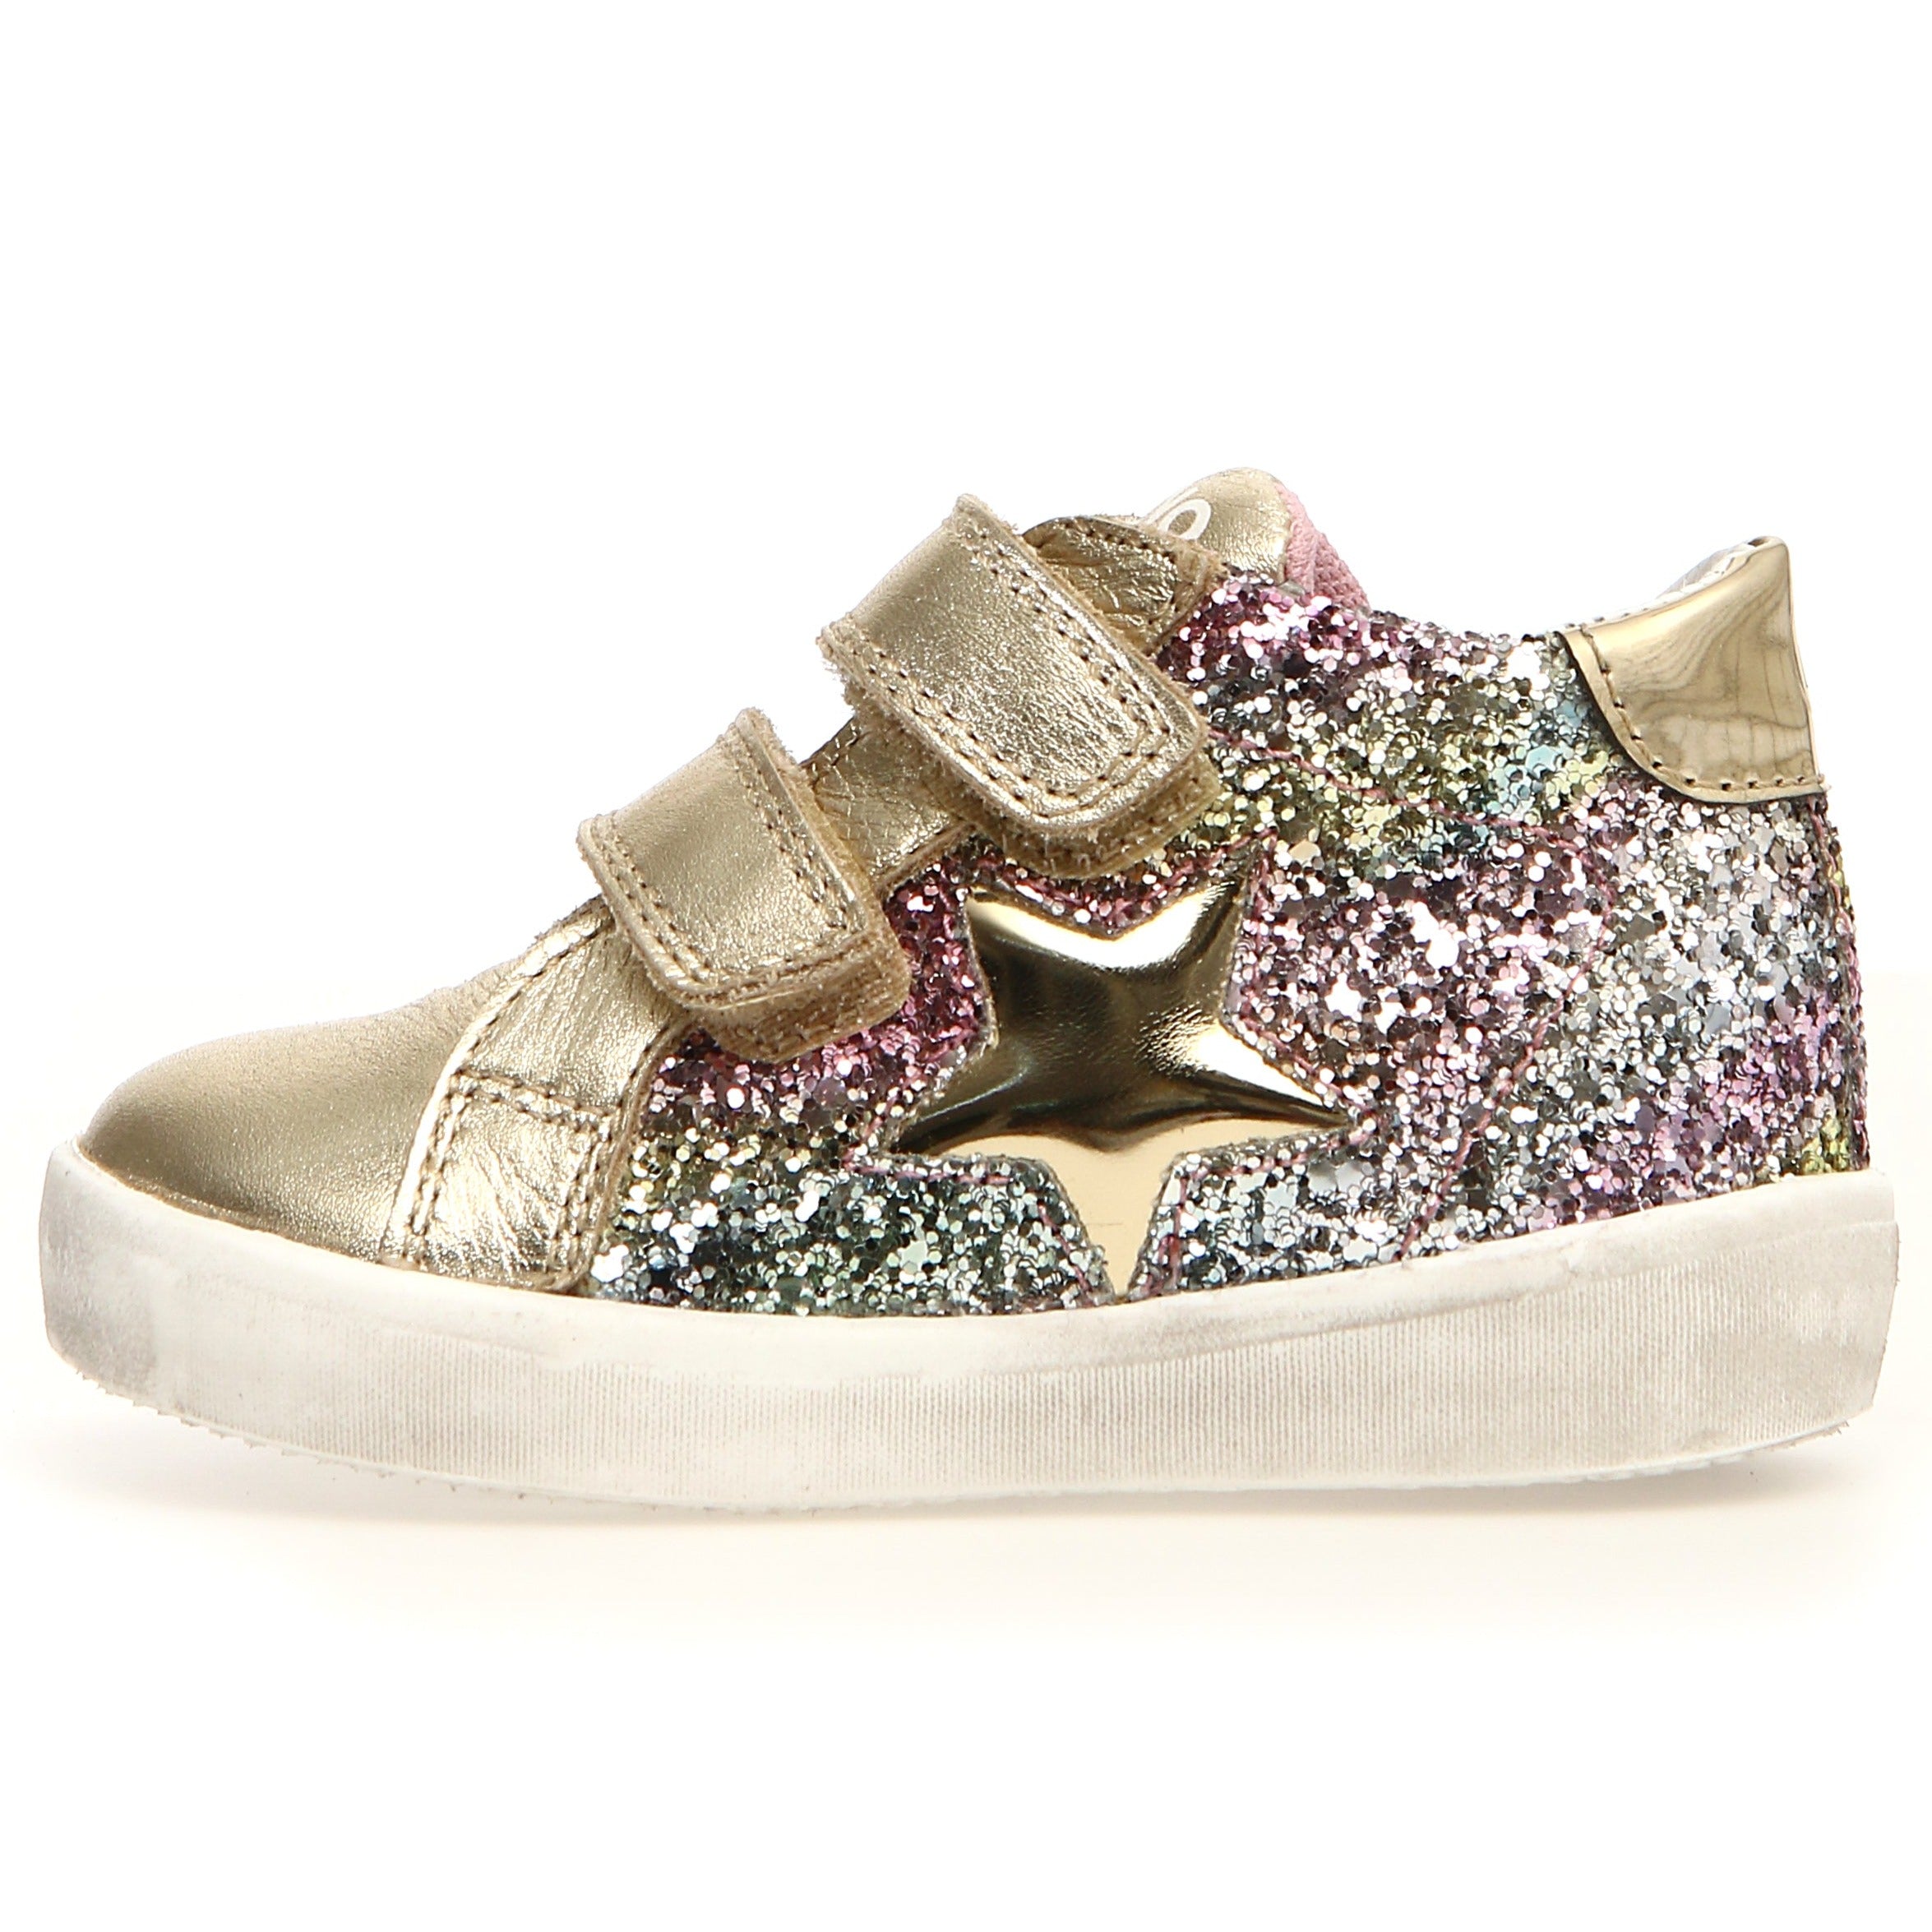 Naturino Dorrie VL Leather and Glitter Sneakers